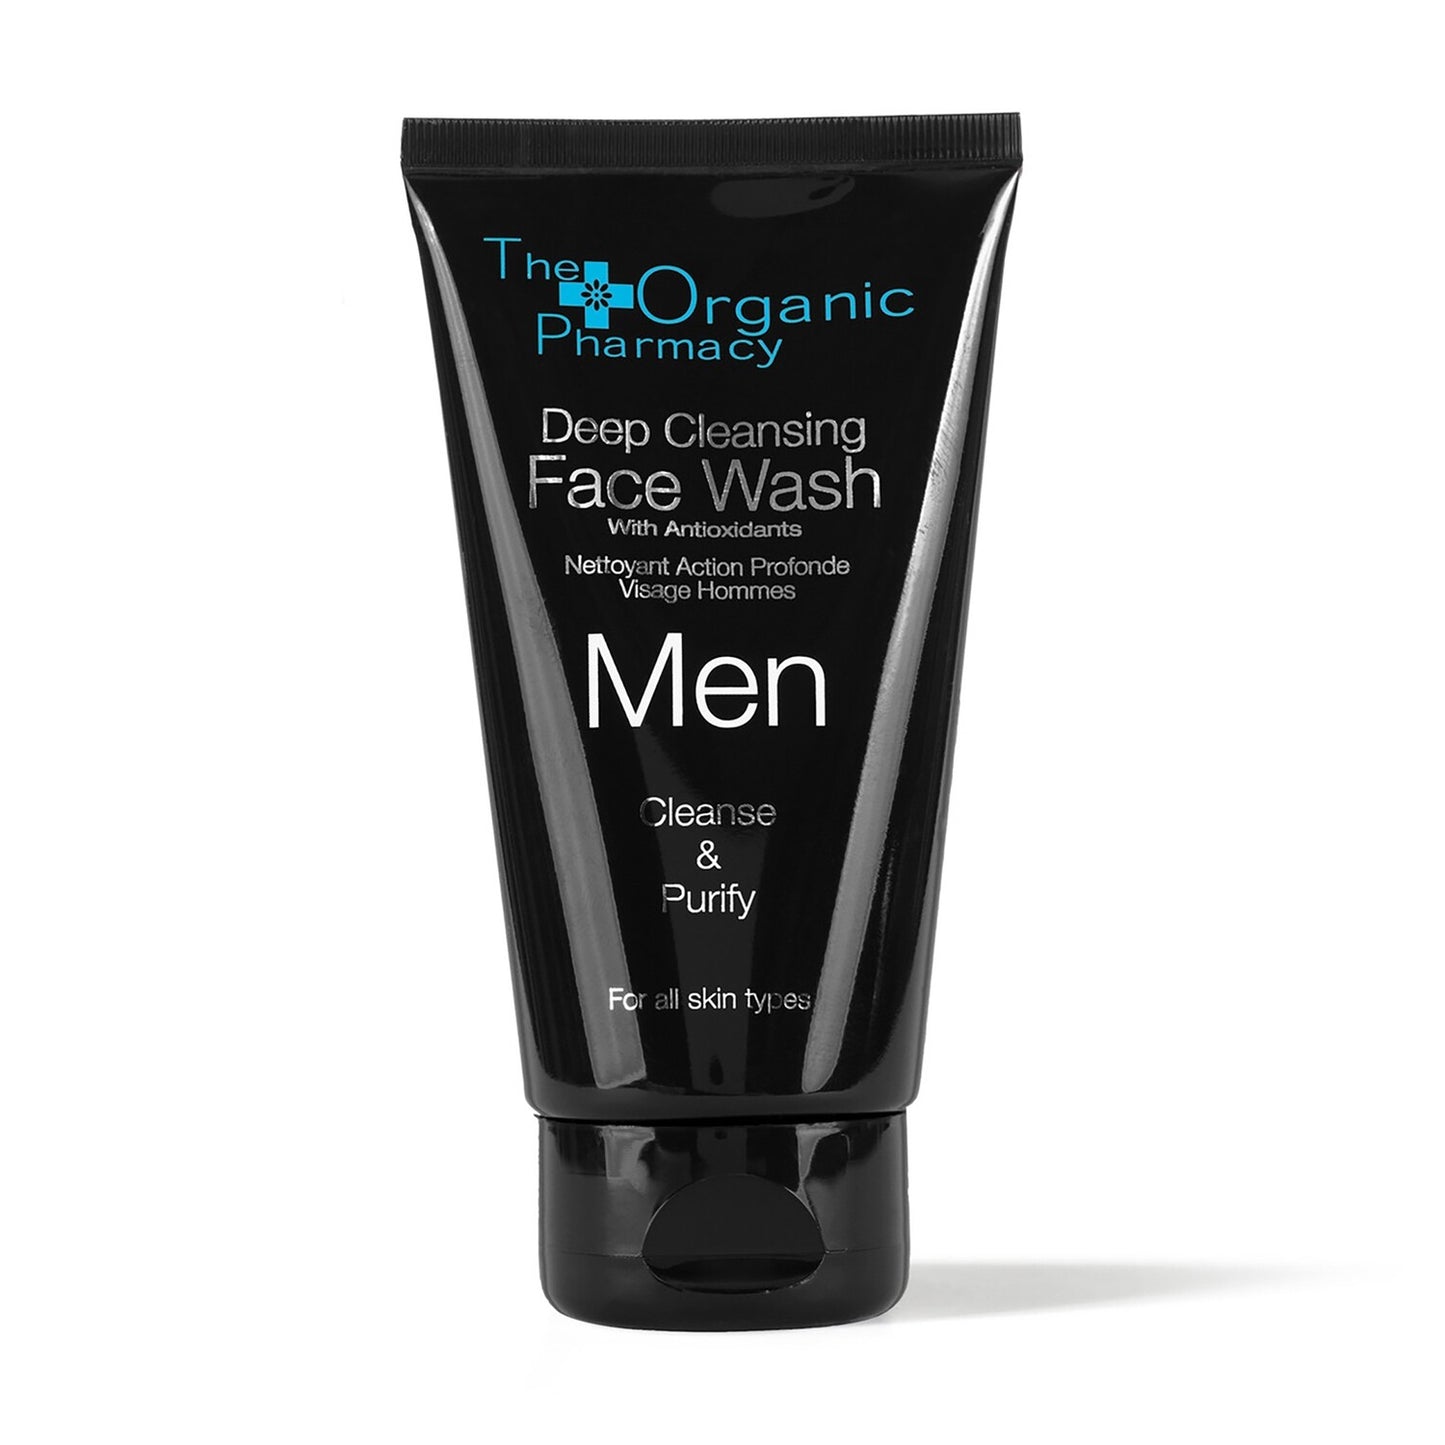 The Organic Pharmacy Men Deep Cleansing Face Wash